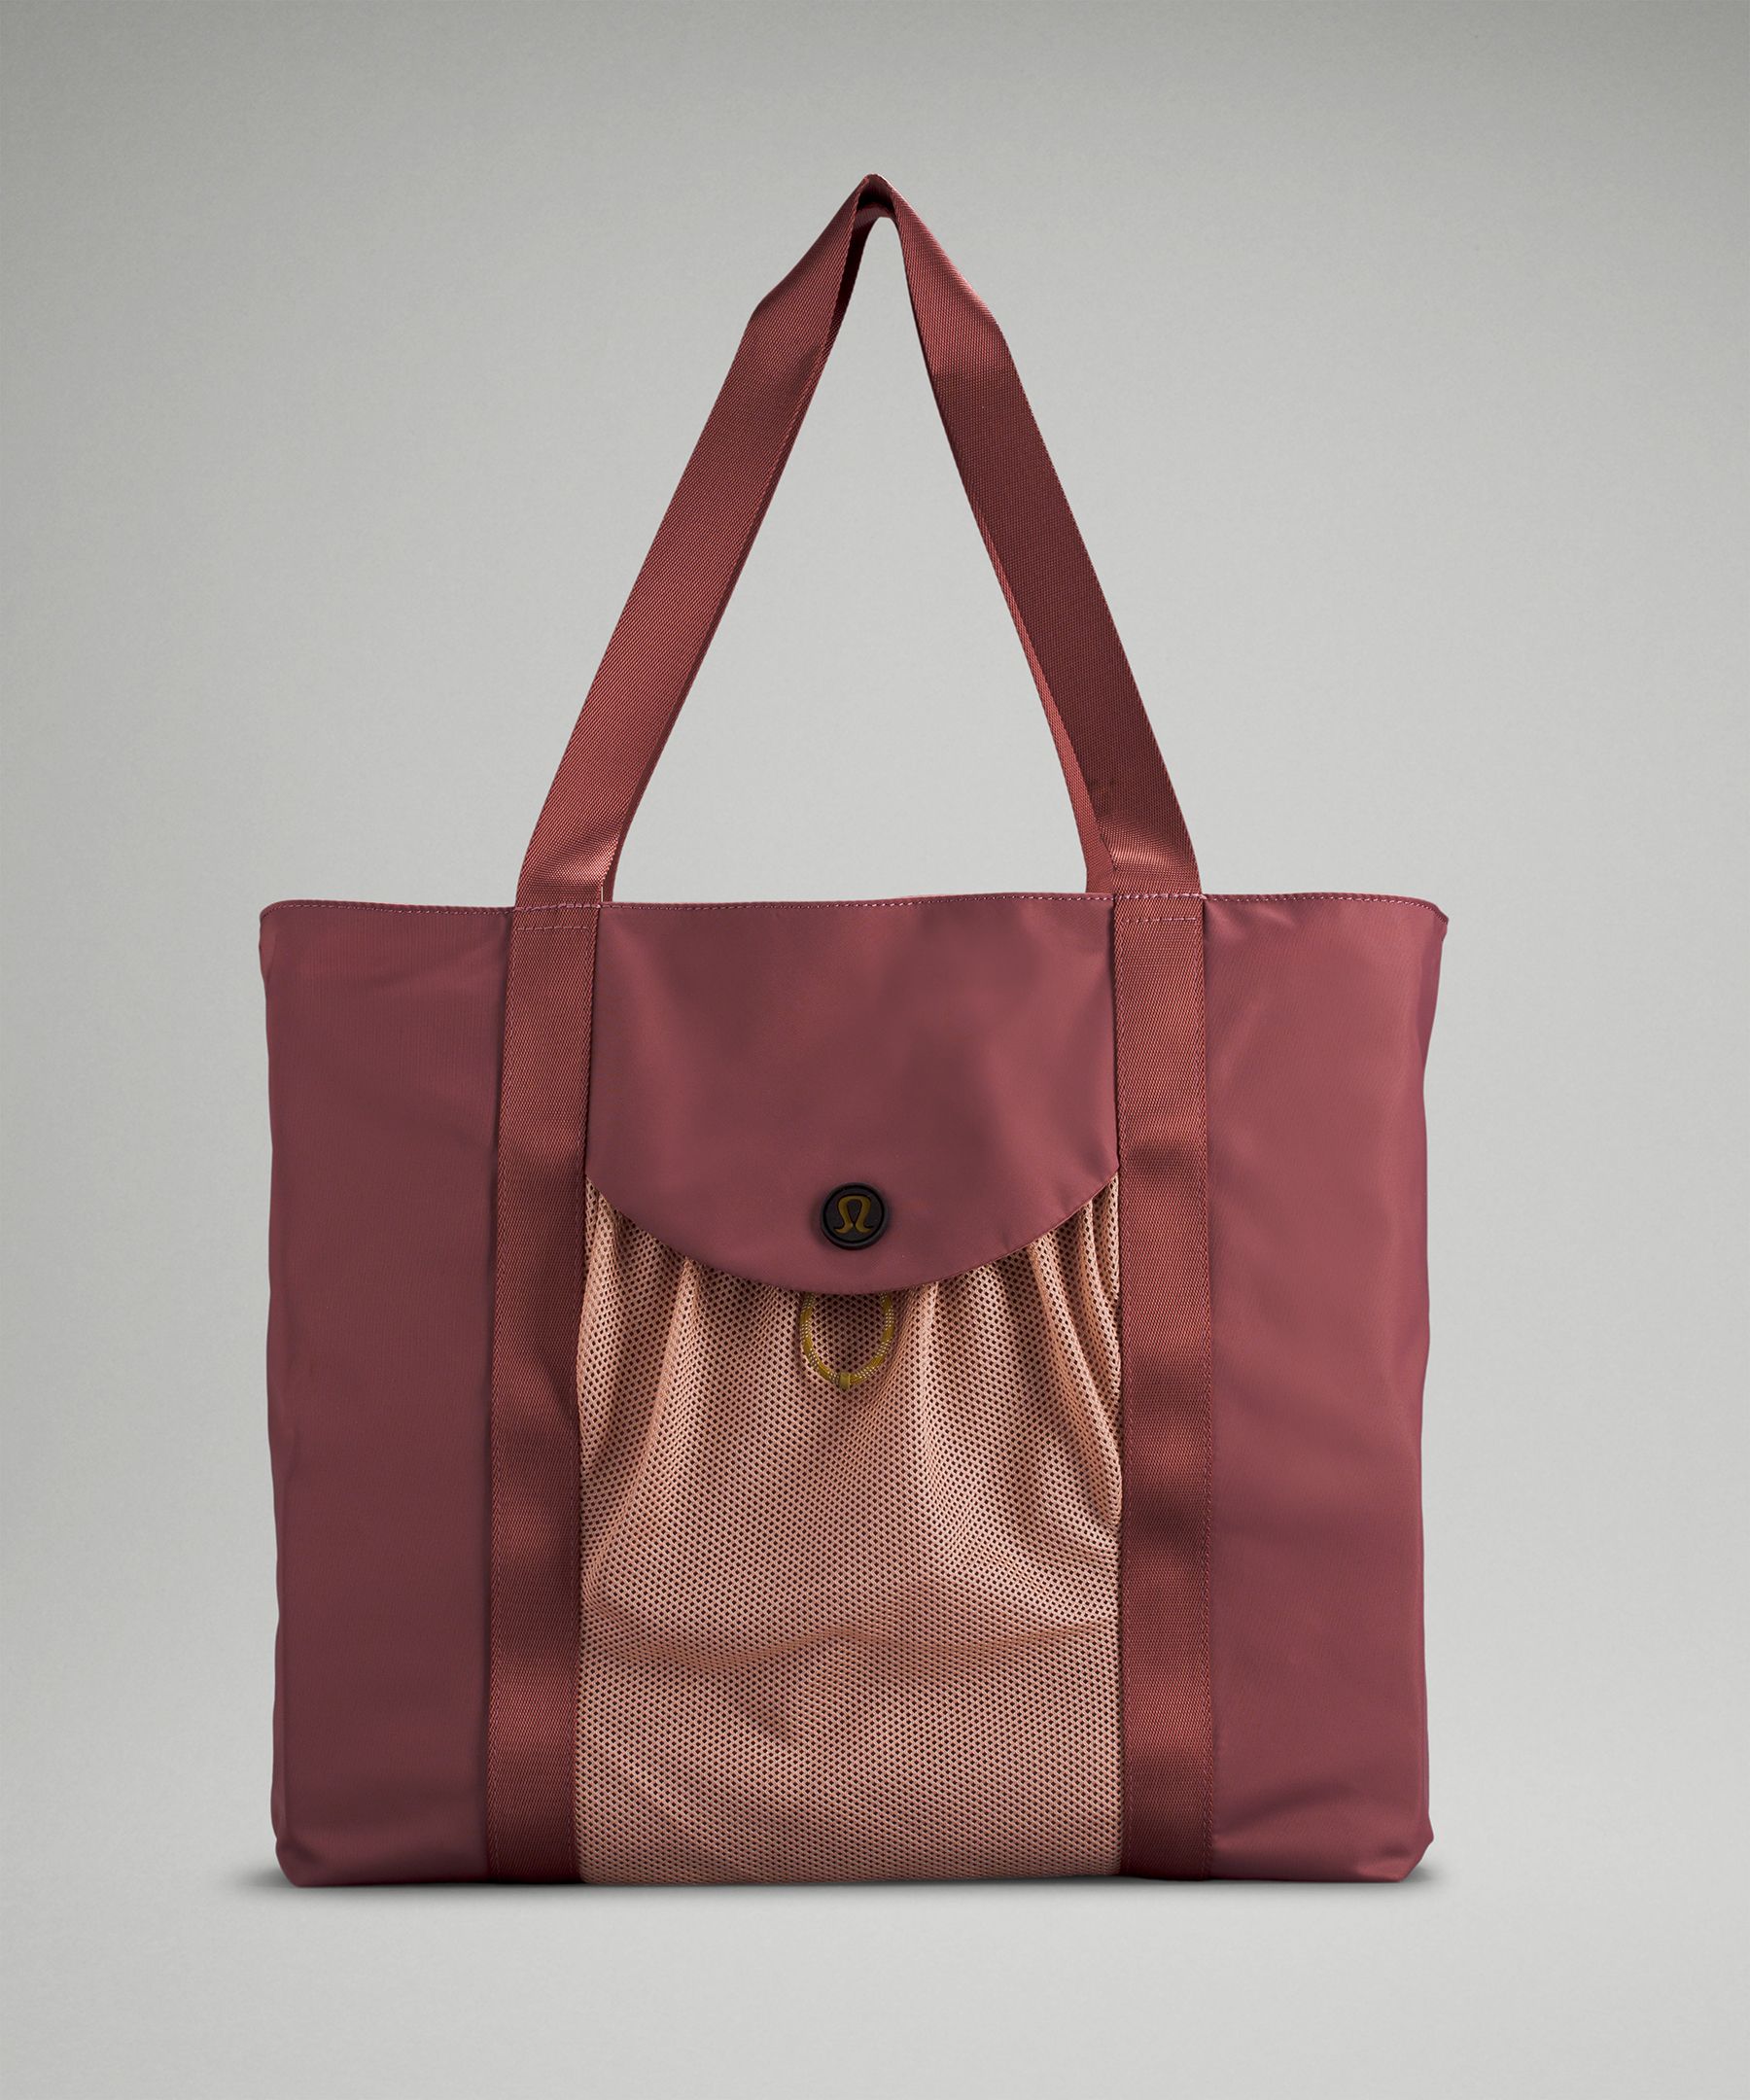 Lululemon Take It On Tote Bag 24l In Spiced Chai/precocious Pink